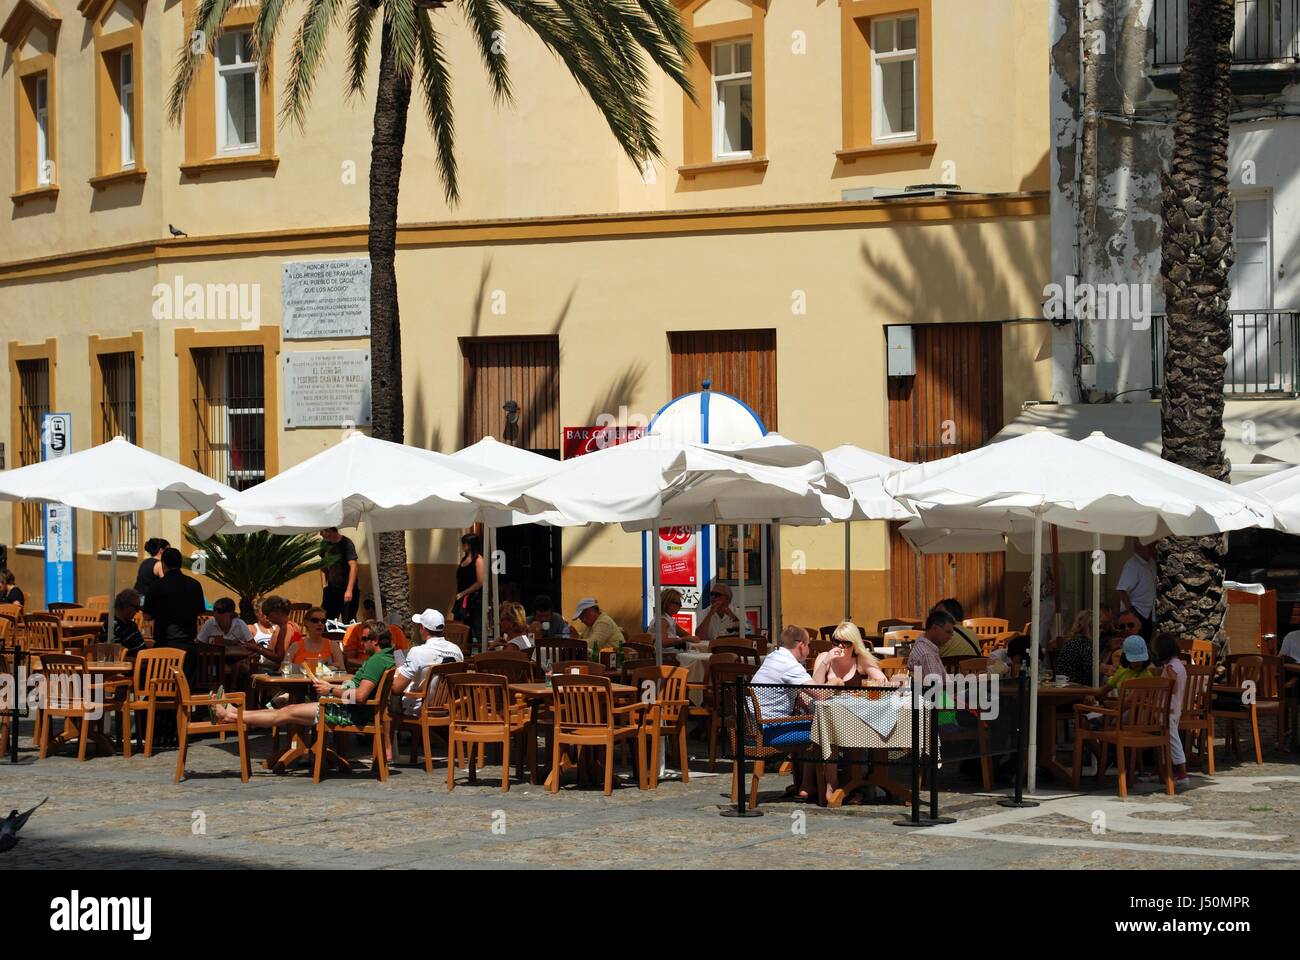 Tourists relaxing at pavement cafes in Cathedral Square, Cadiz, Cadiz Province, Andalusia, Spain, Western Europe. Stock Photo